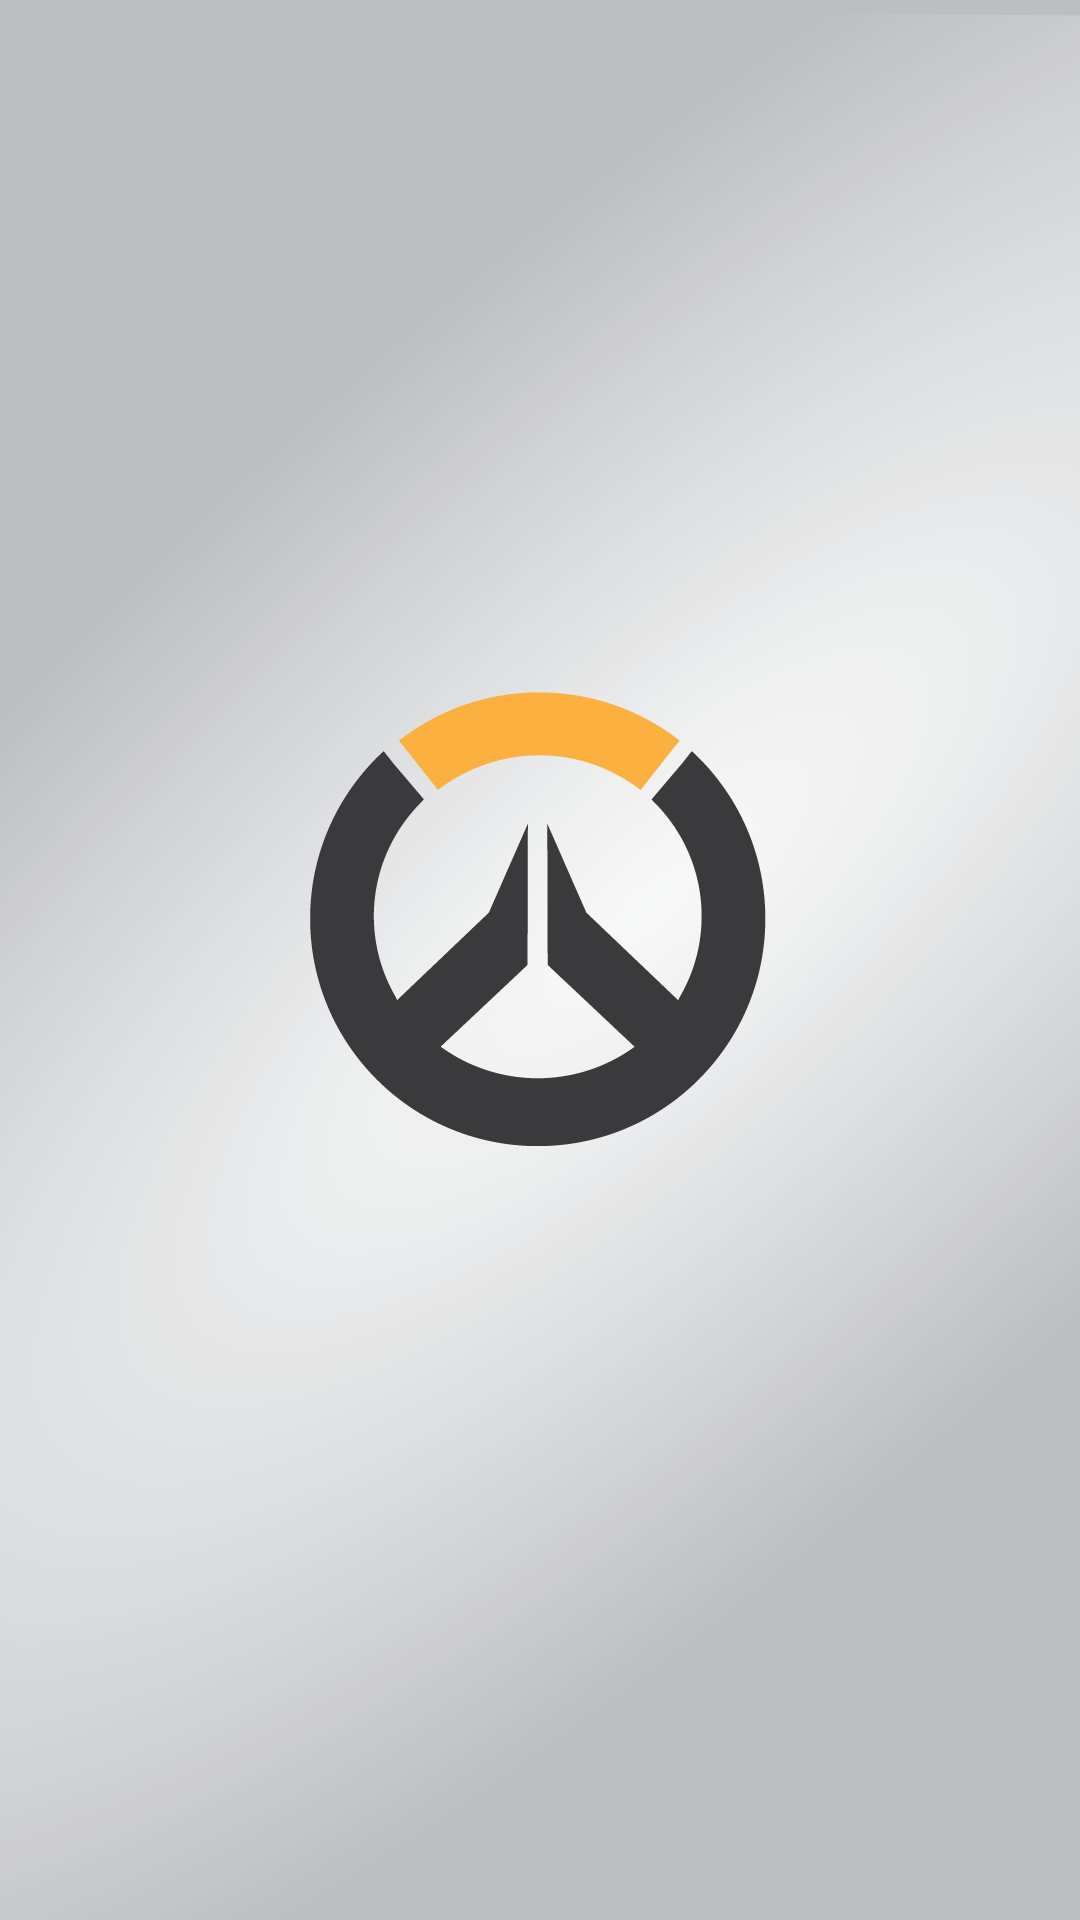 wallpapers overwatch edition  lockscreen for overwatch wallpaper version  by Anon Submoon